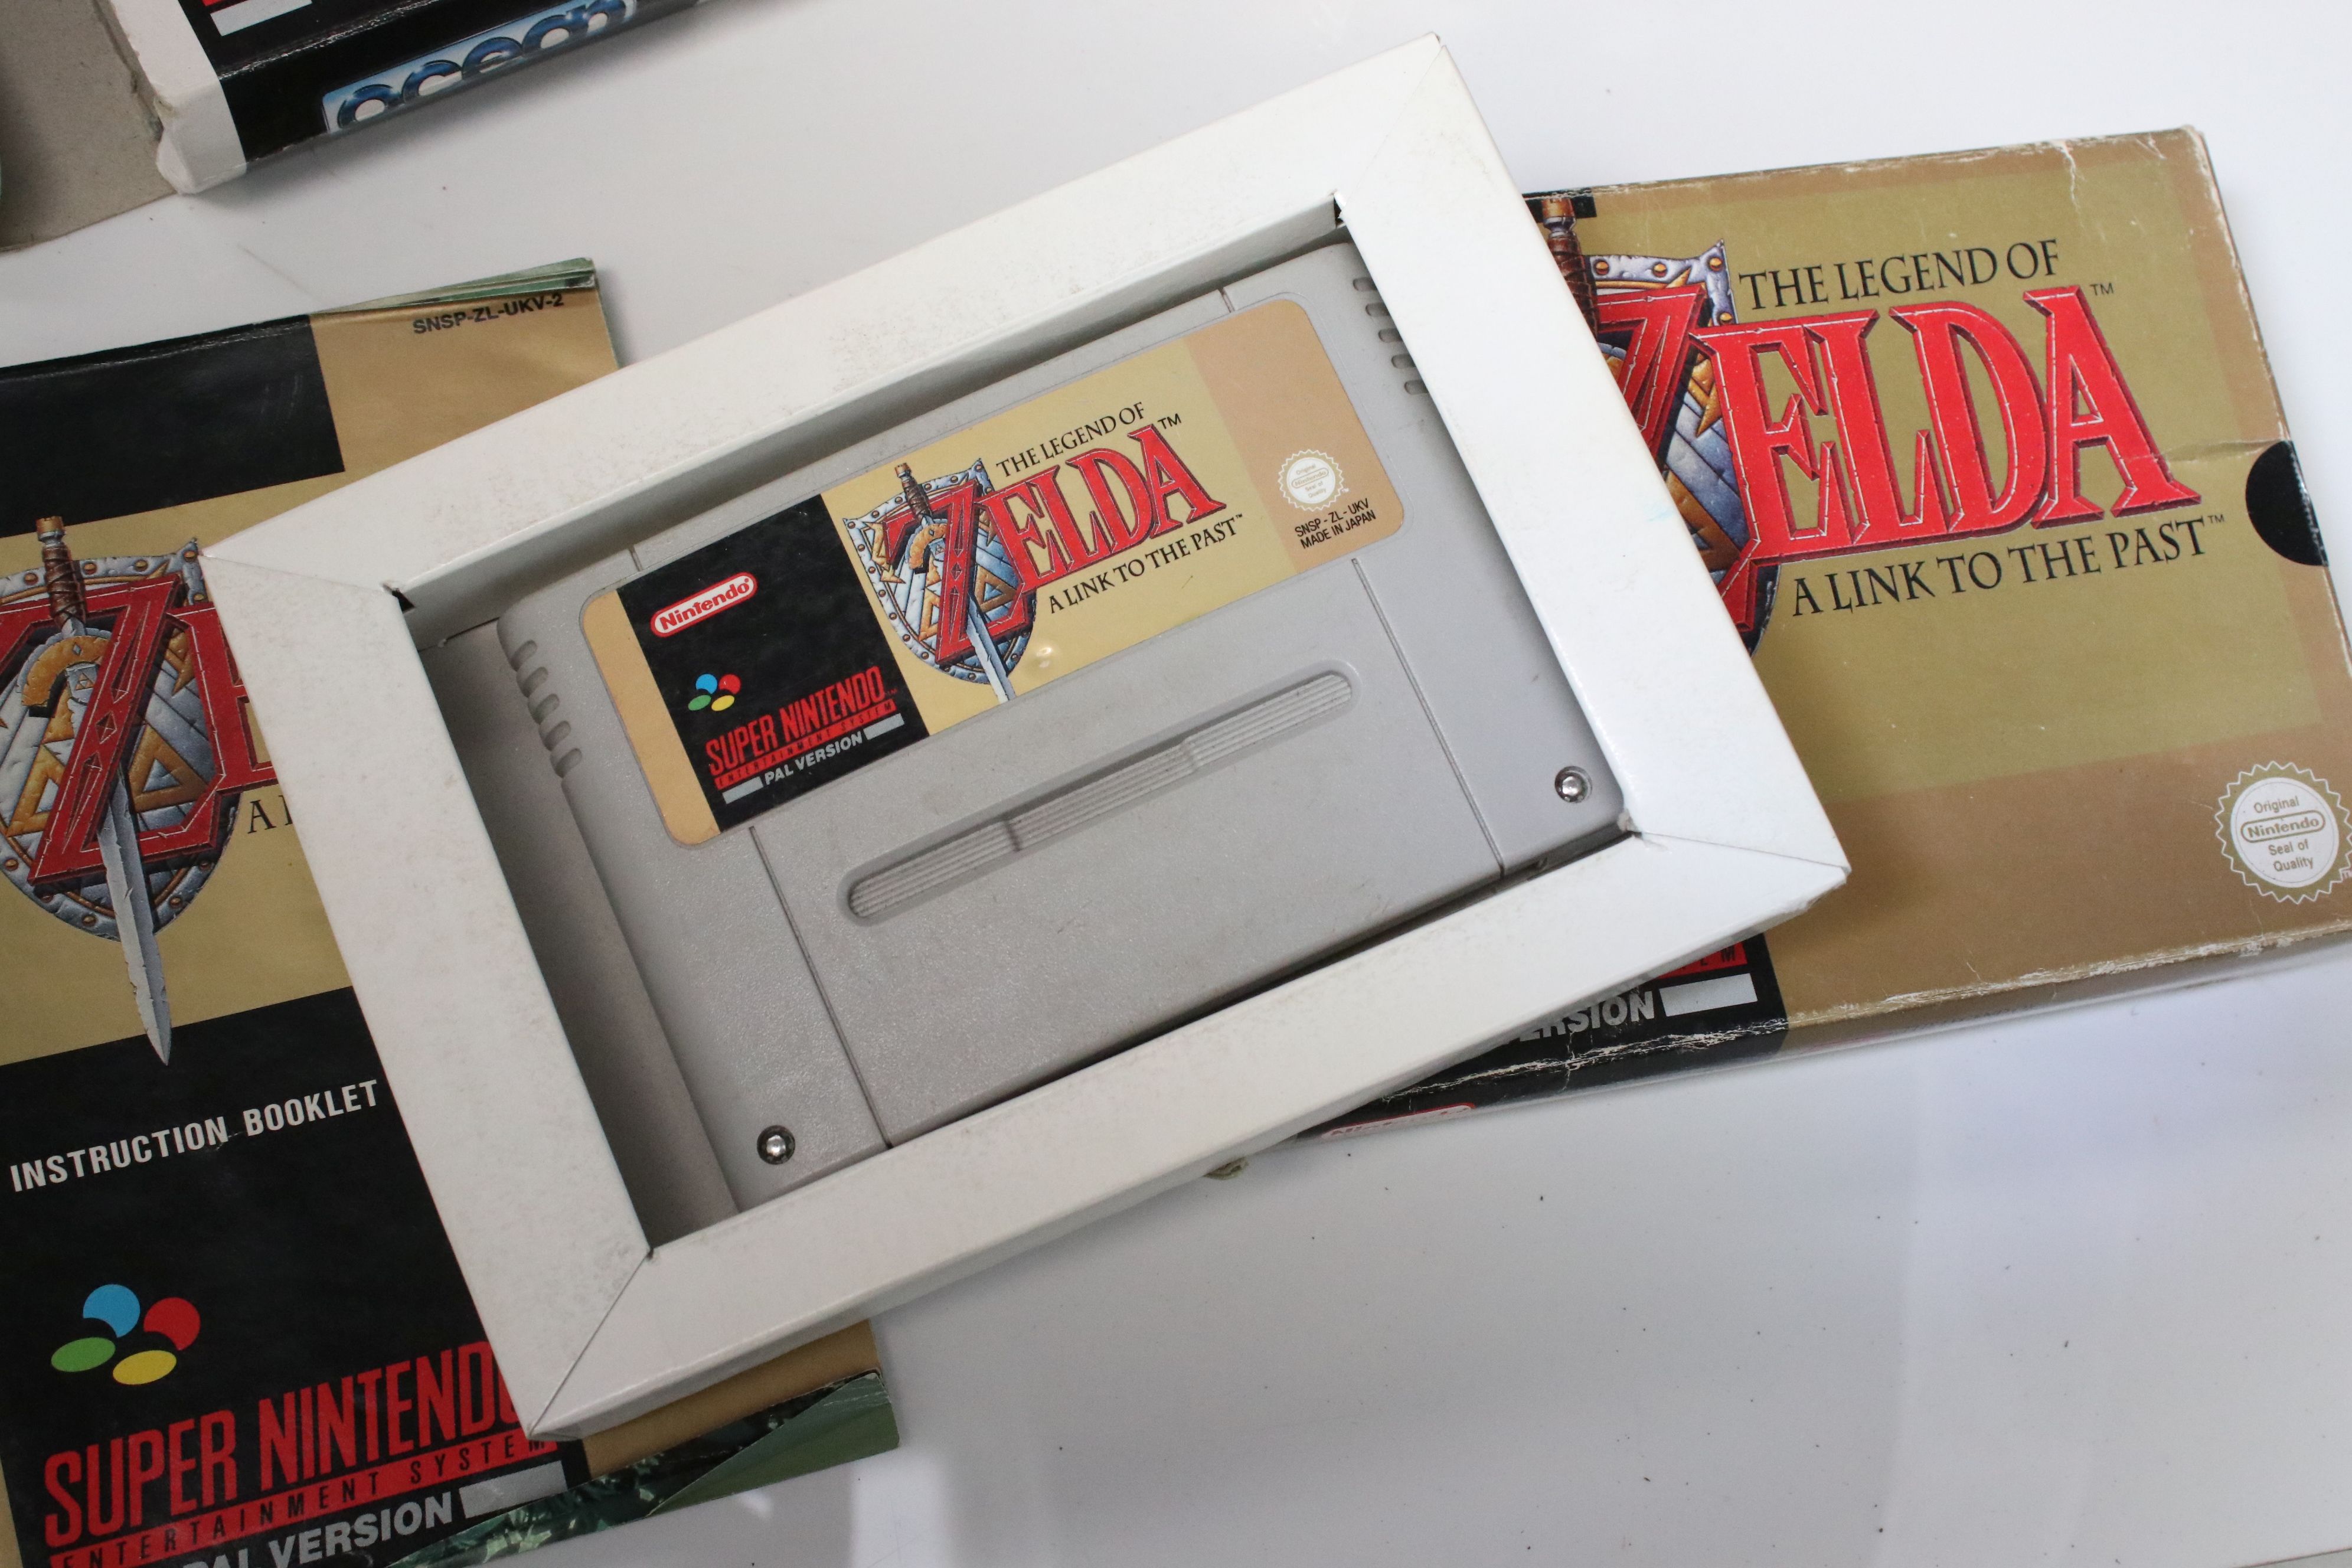 Retro Gaming - Boxed Super Nintendo SNES console with one controller and Super Mario World cartridge - Image 2 of 10